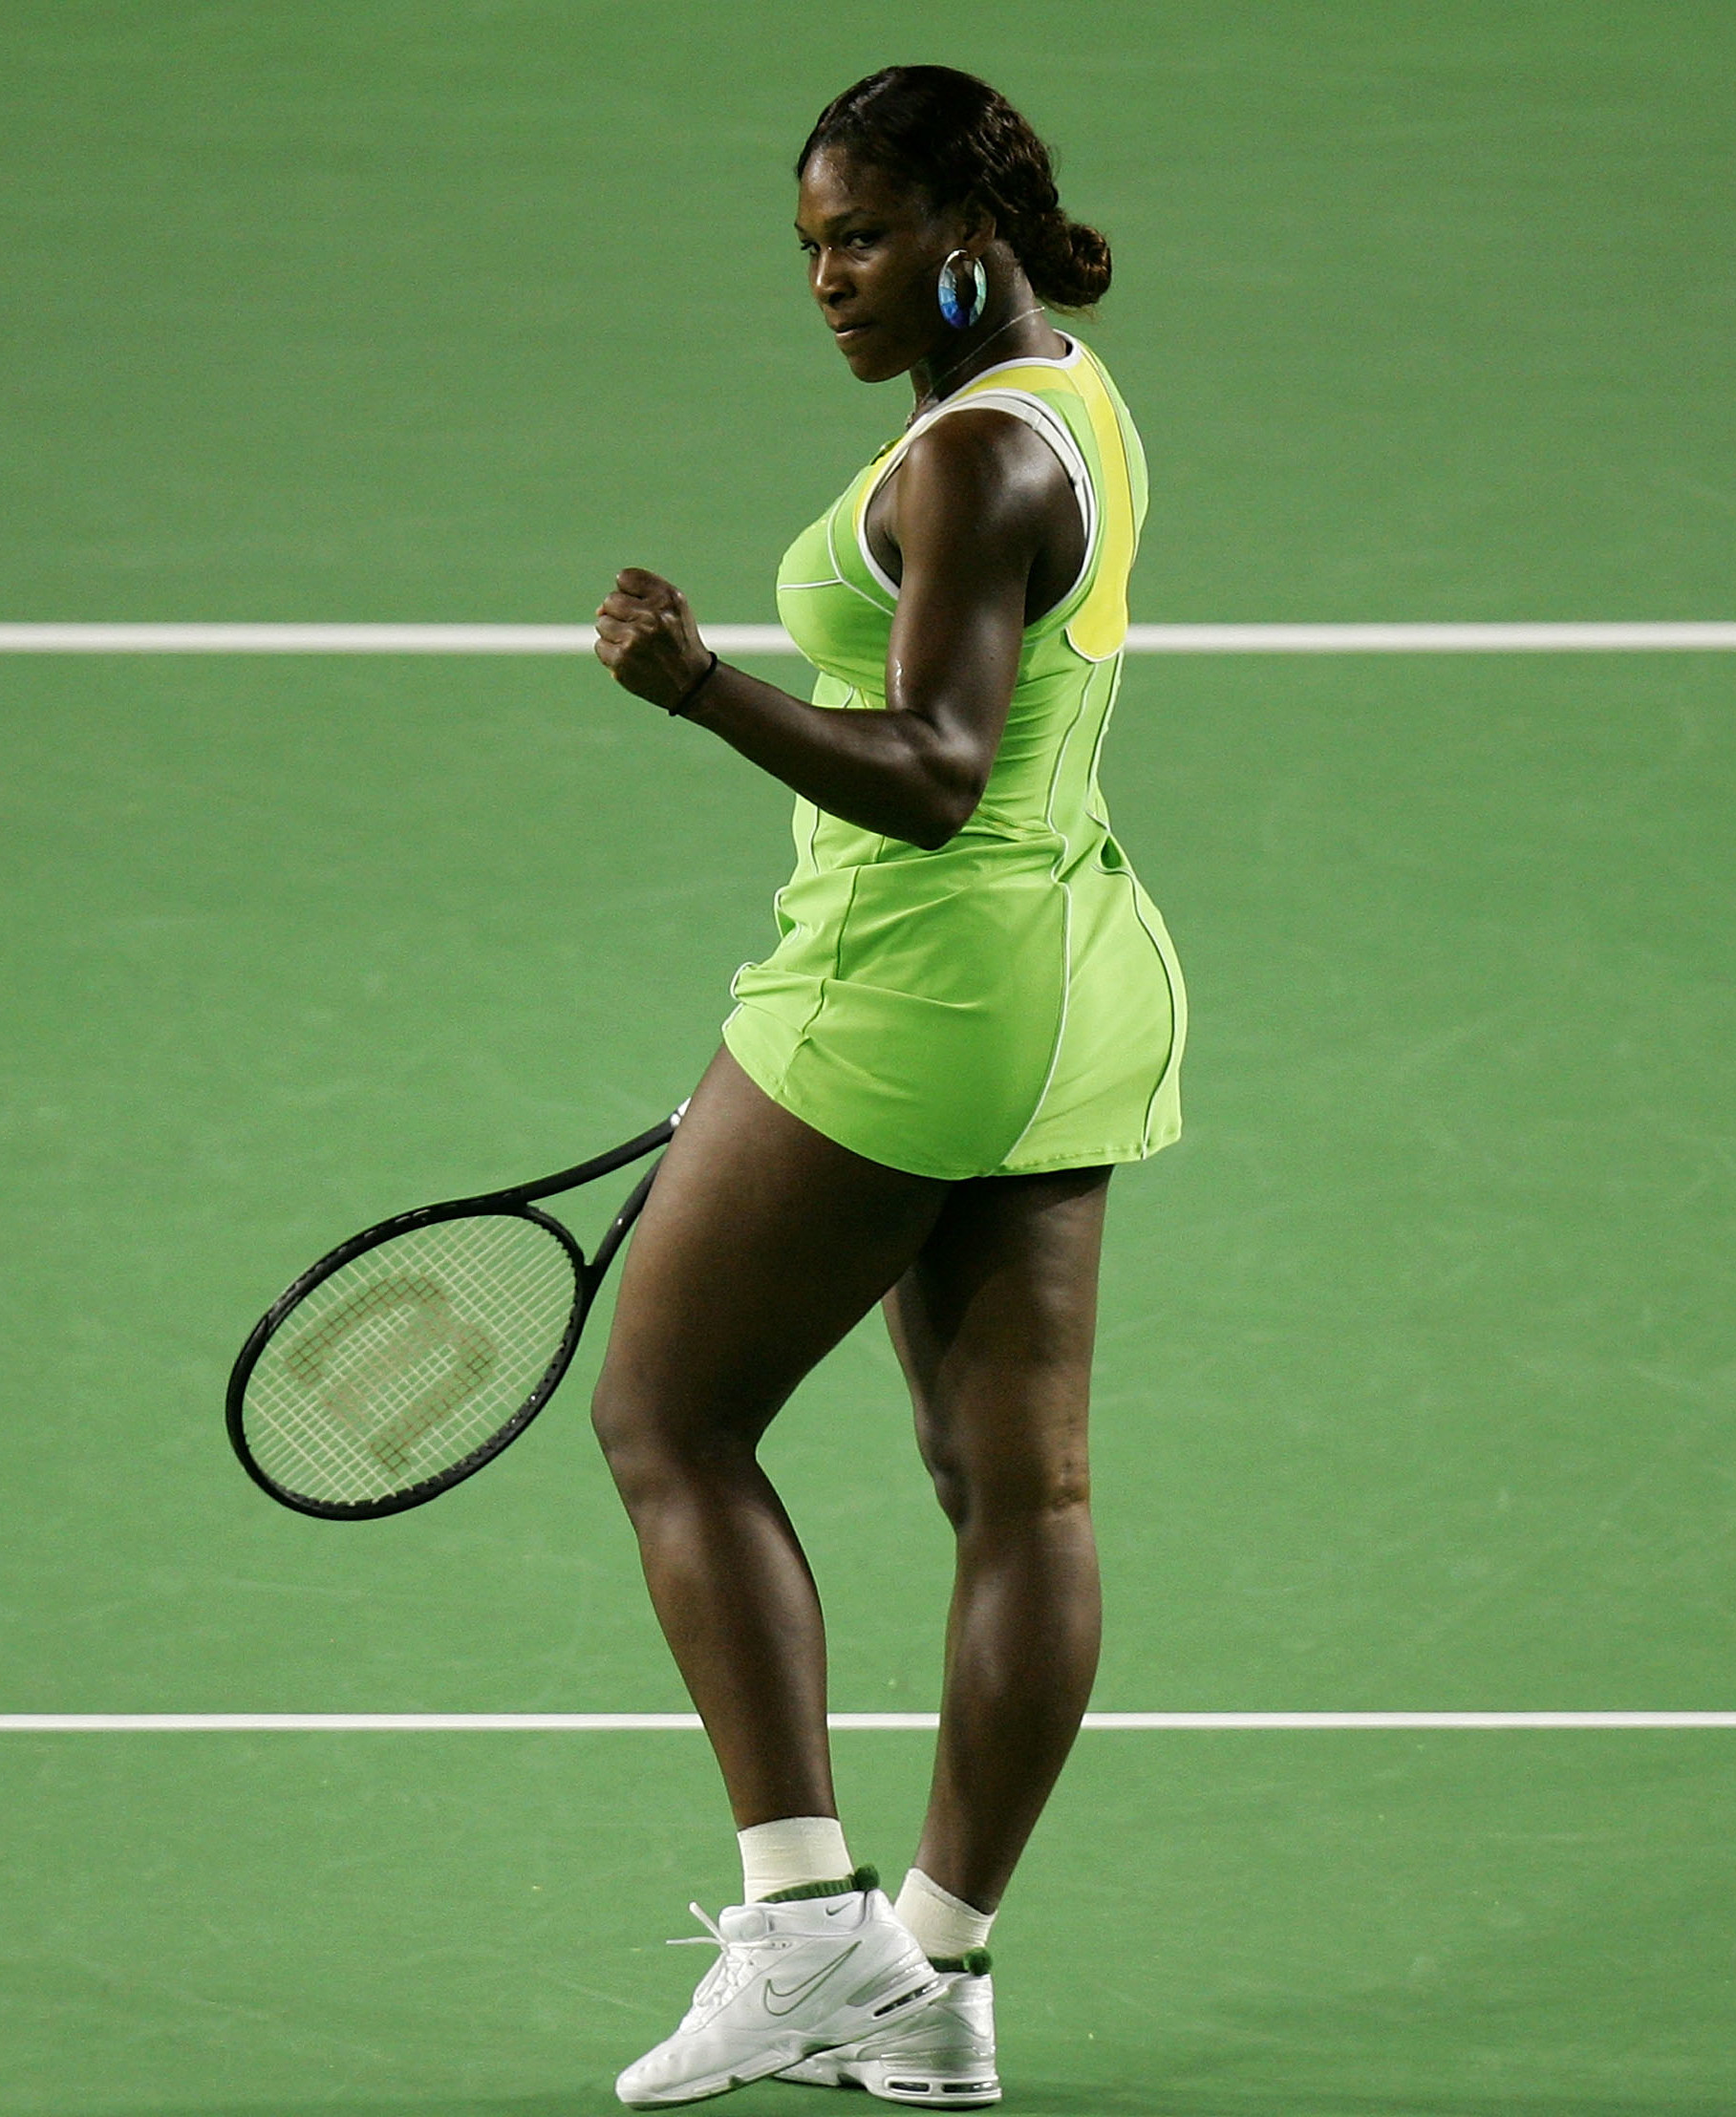 Serena Williams Wins the 2007 Australian Open in the Nike Air Max SW